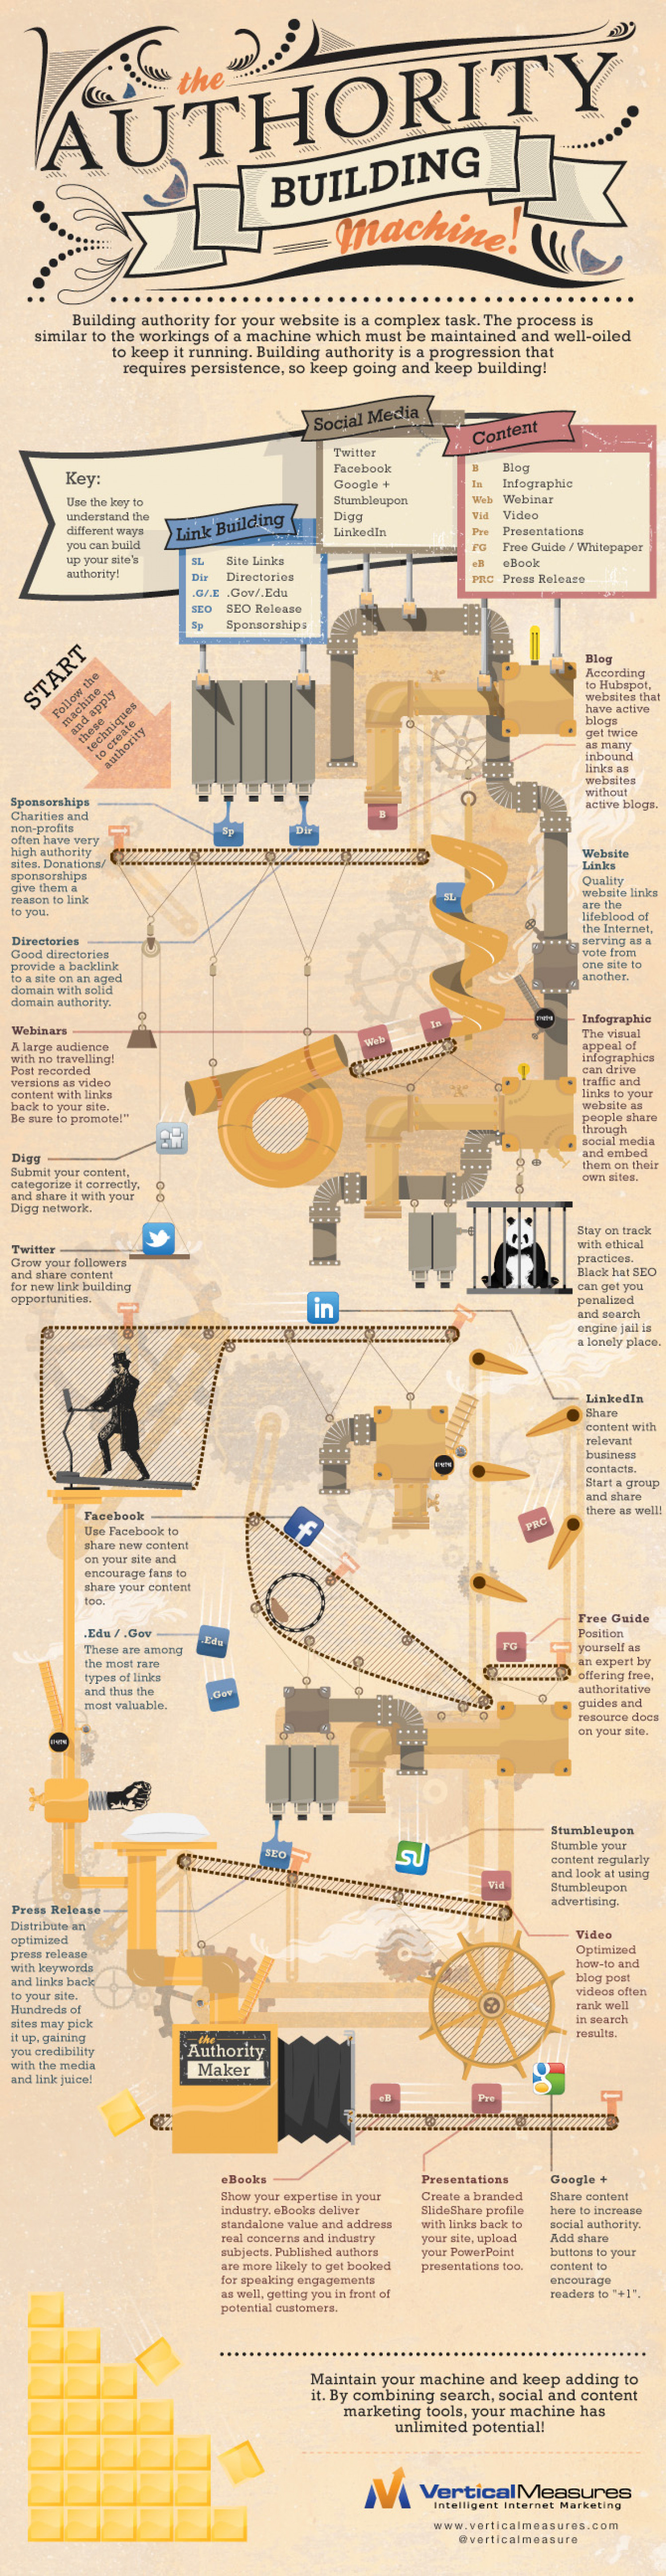 The Authority Building Machine  Infographic